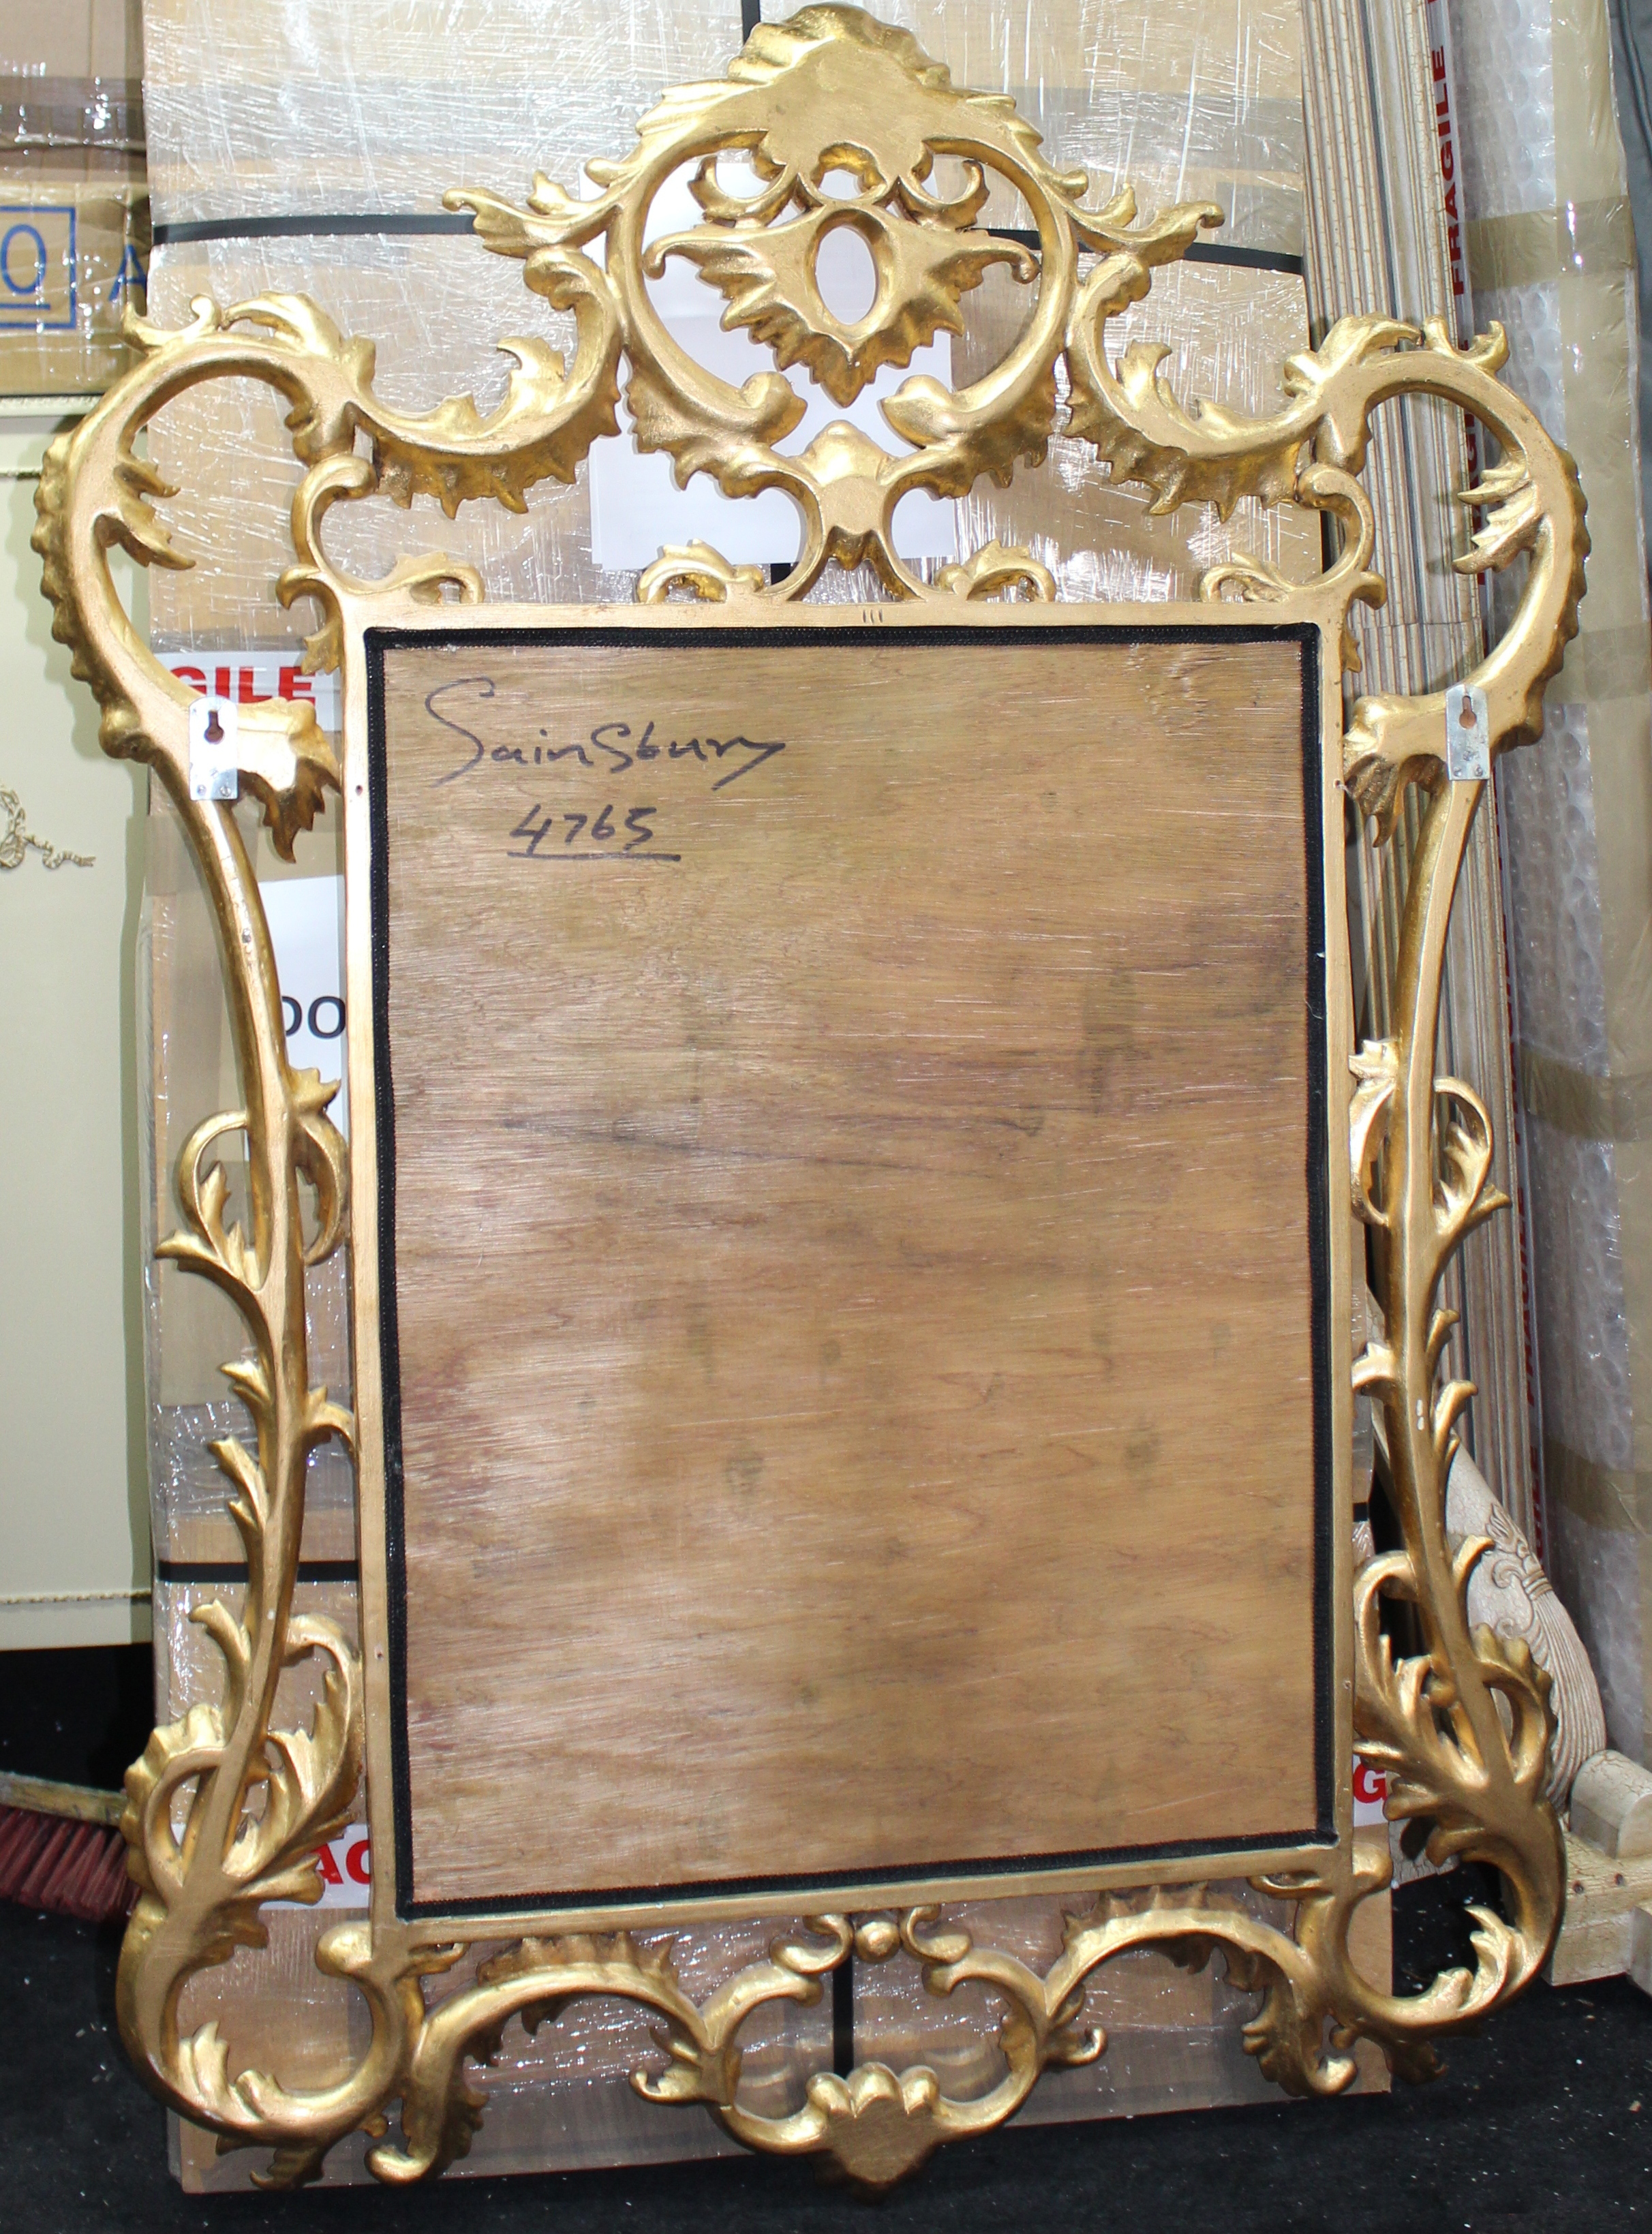 Pair of Ornate Carved Wood Gilt Bevelled Mirrors - Image 2 of 2